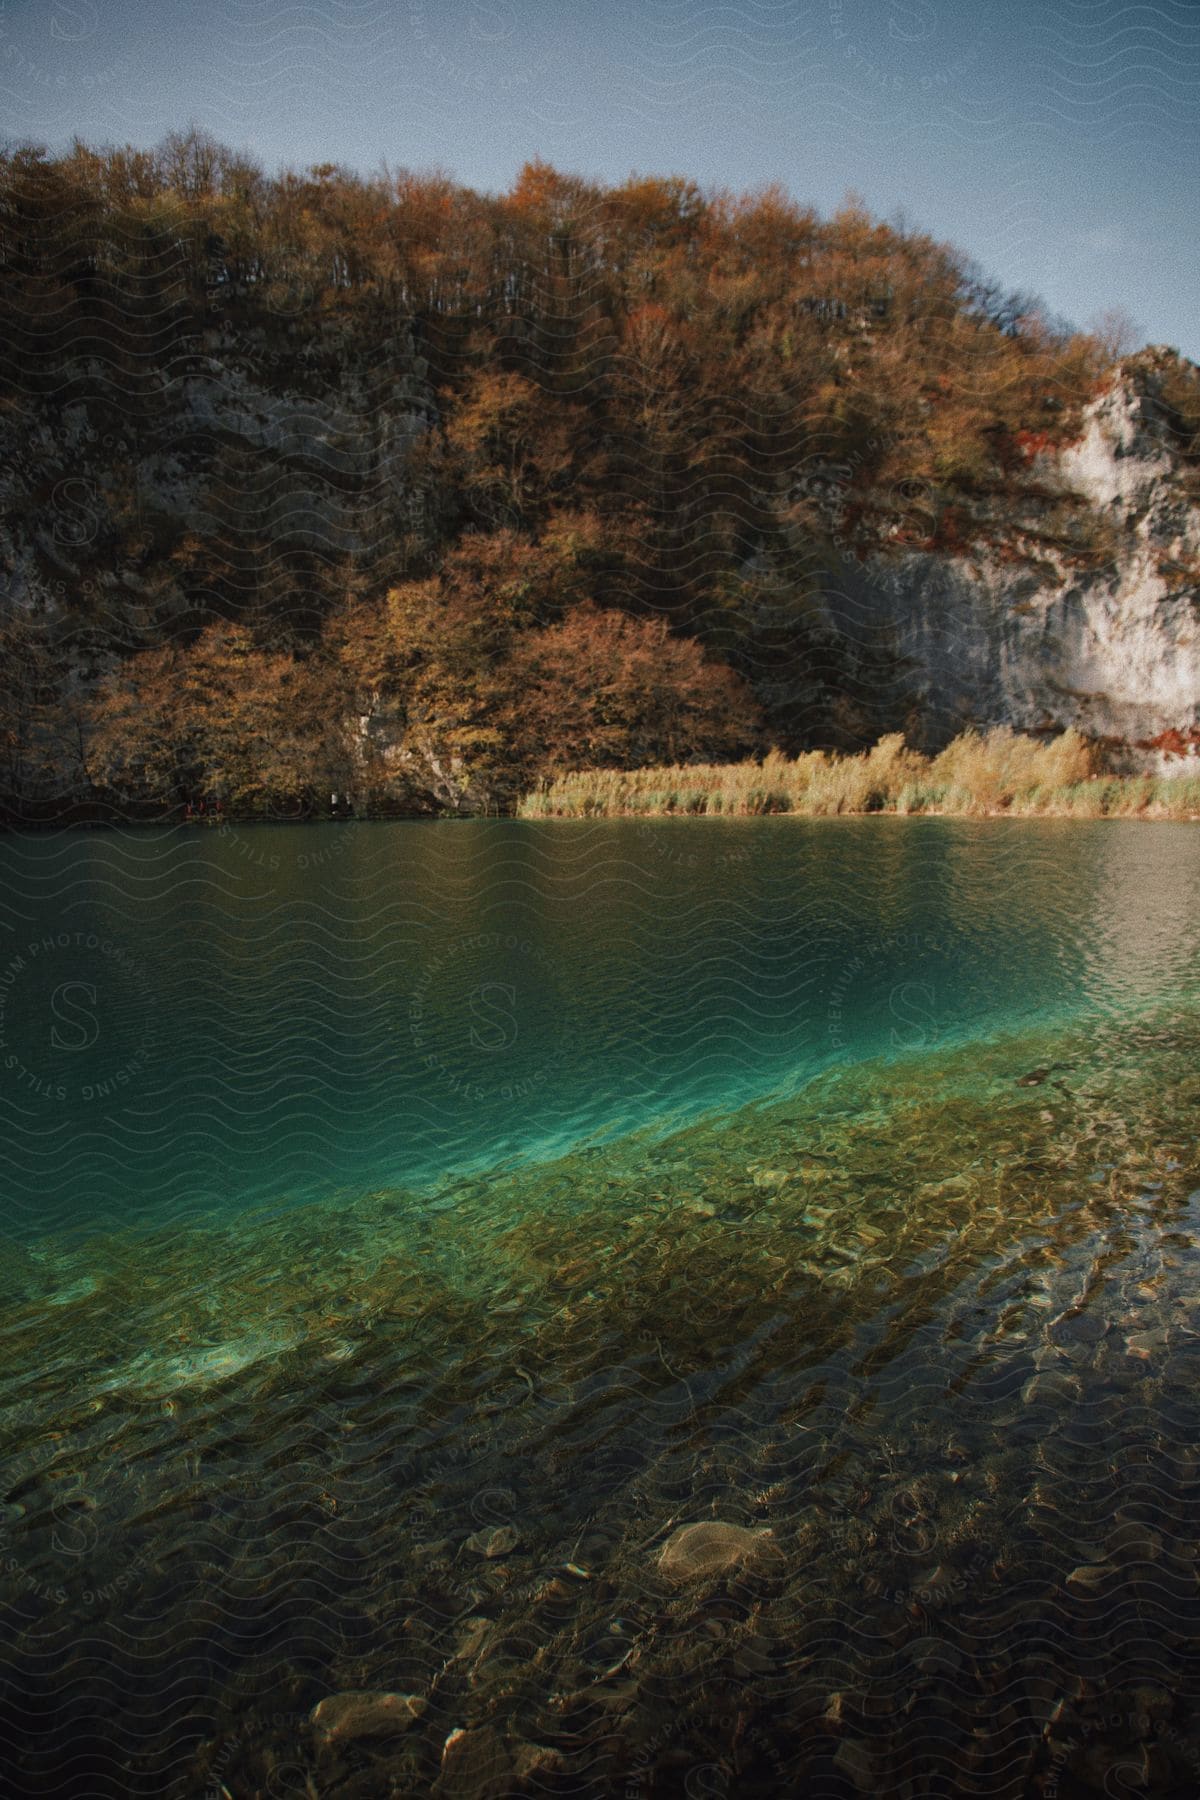 Crystal-clear lake with visible stones under the surface and a backdrop of autumn-colored trees on a rocky cliff.